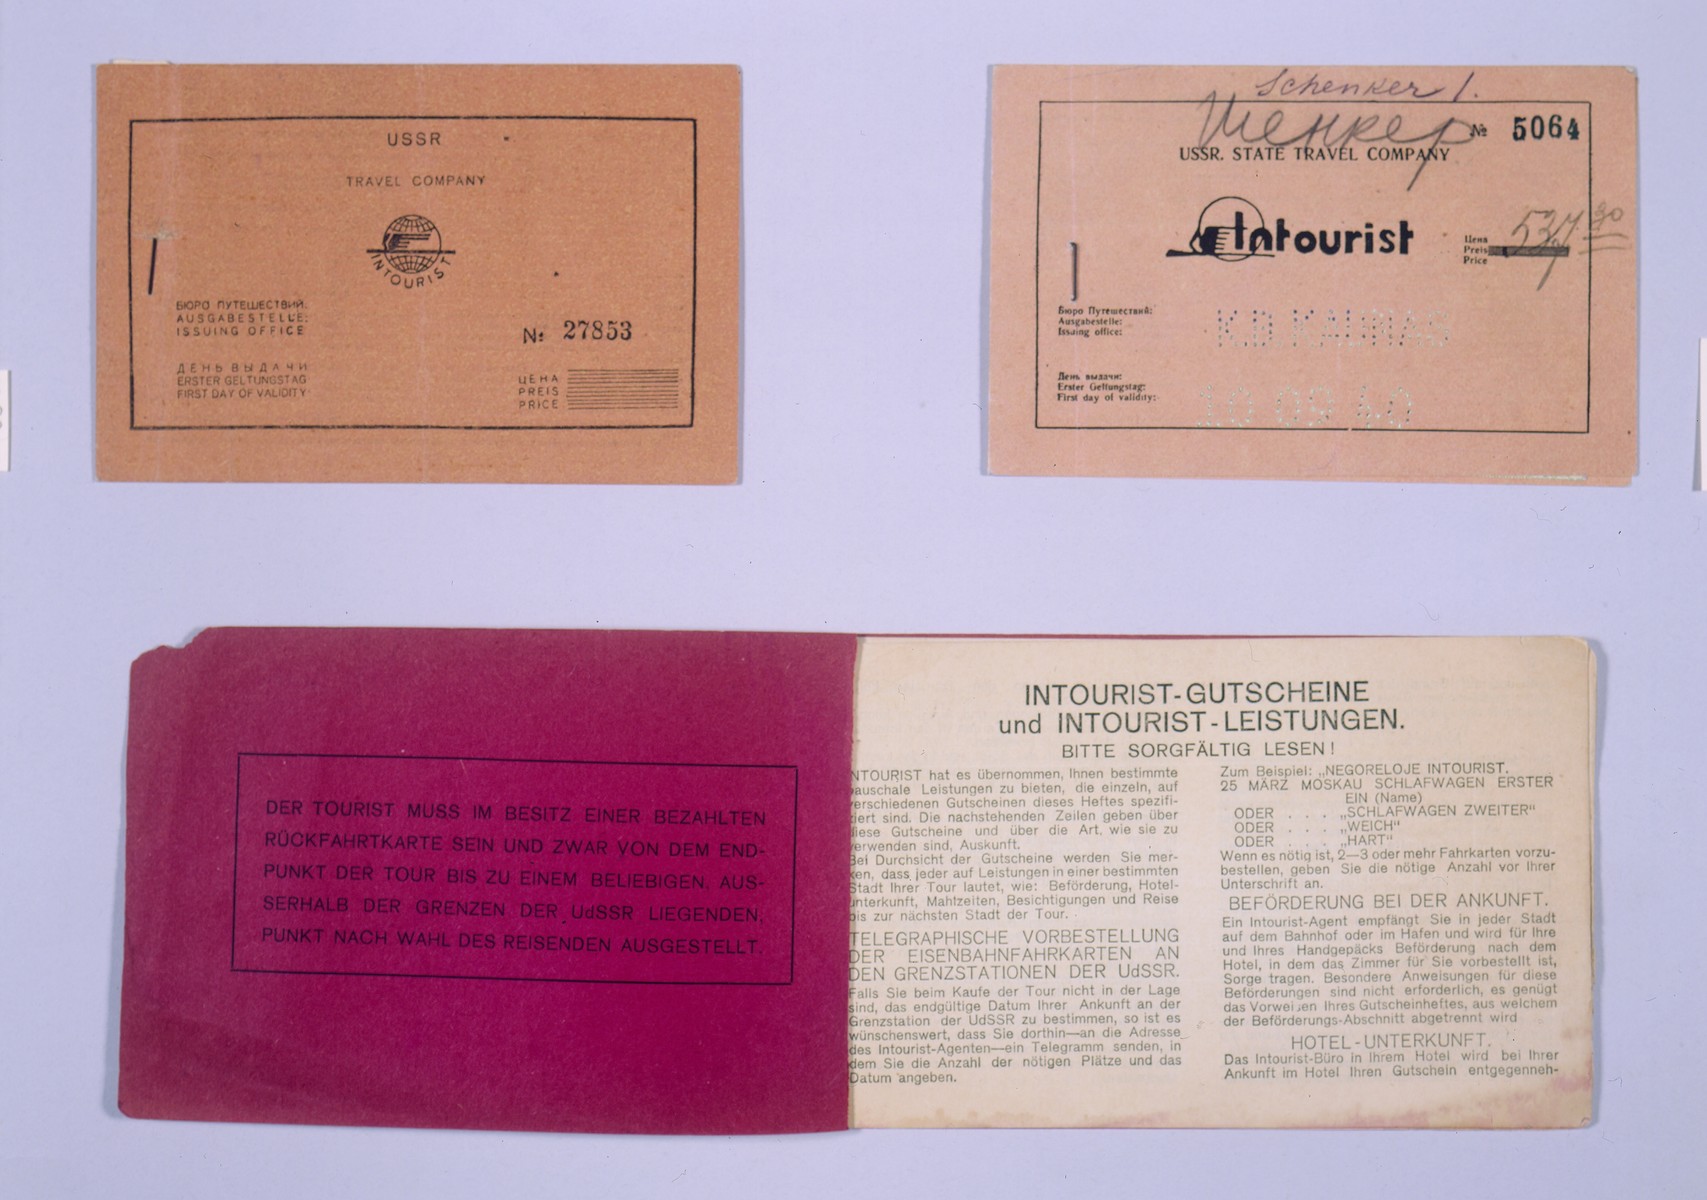 Composite photograph of three intourist tickets for the Trans-Siberian railway to Vladivostok.  

1. An intourist ticket for the Trans-Siberian railway to Vladivostok, purchased in the United States for $99.95 by one of Leon Pommer's sisters, dated January 29, 1941(Pommer collection, top left).

2. An intourist ticket for the Trans-Siberian railway to Vladivostok dated October 9, 1940 purchased for $83.16 (Schenker collection, top right).

3. A third class intourist ticket book containing coupons for lunch and dinner (Nowogrodzki collection, bottom).